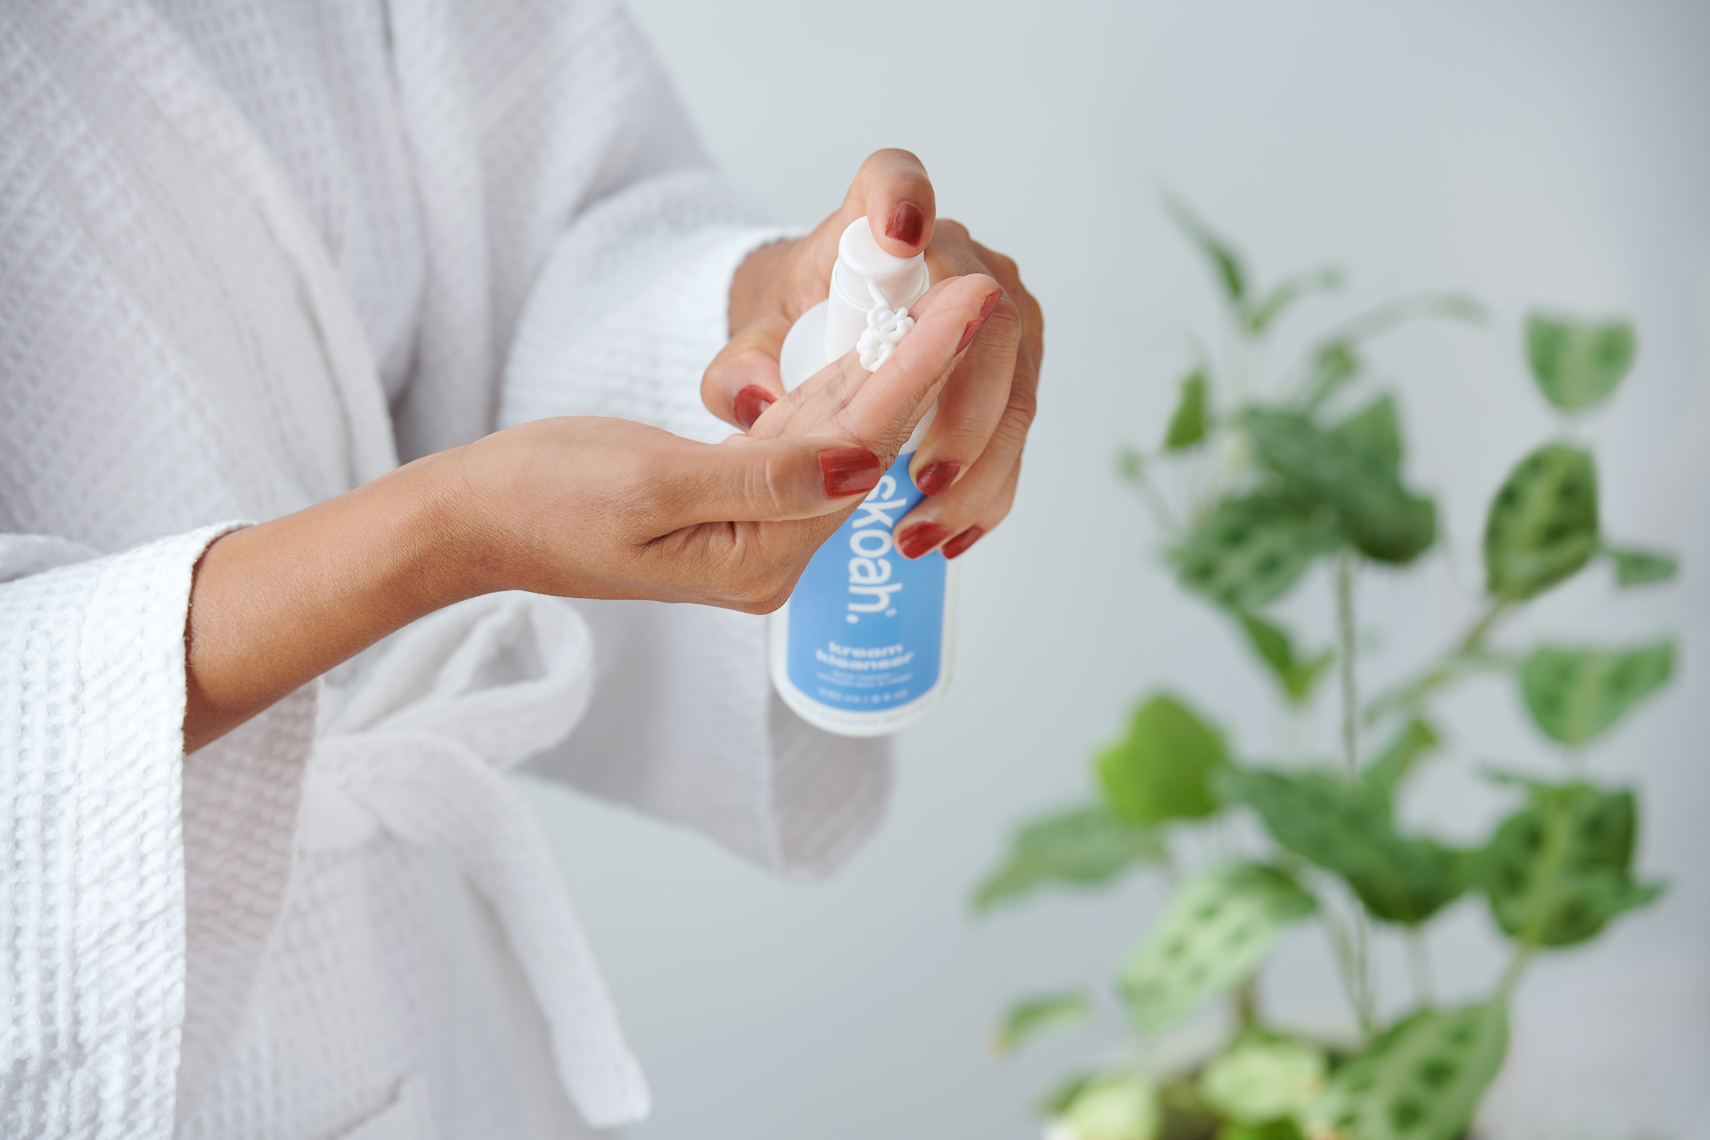 2018 - Vancouver - lifestyle - Photographer - Erich Saide - Advertising - Skoah. - Product - cleanser - hands